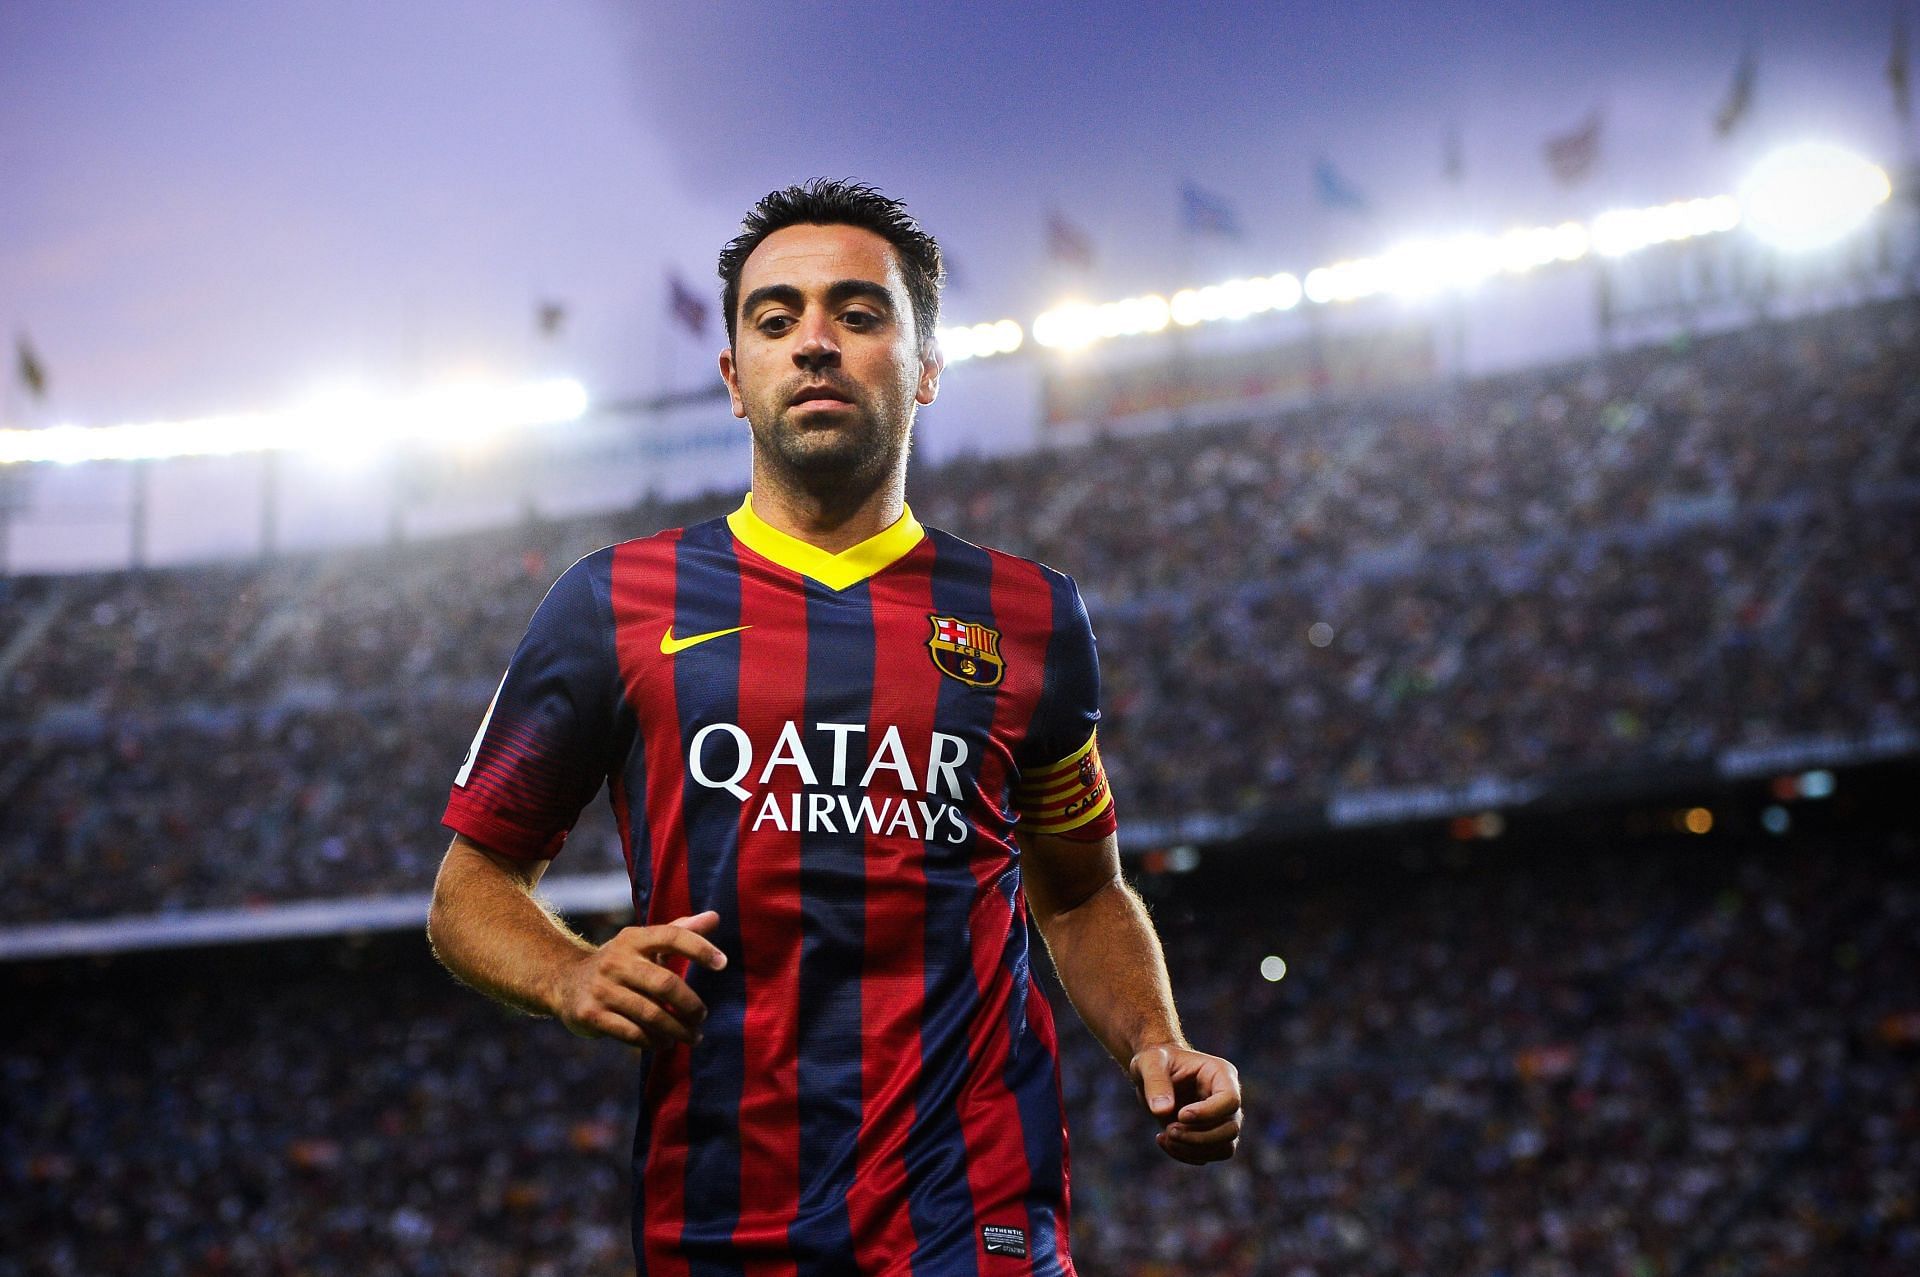 Xavi Hernandez is one of the few players to have both played for and managed Barcelona.